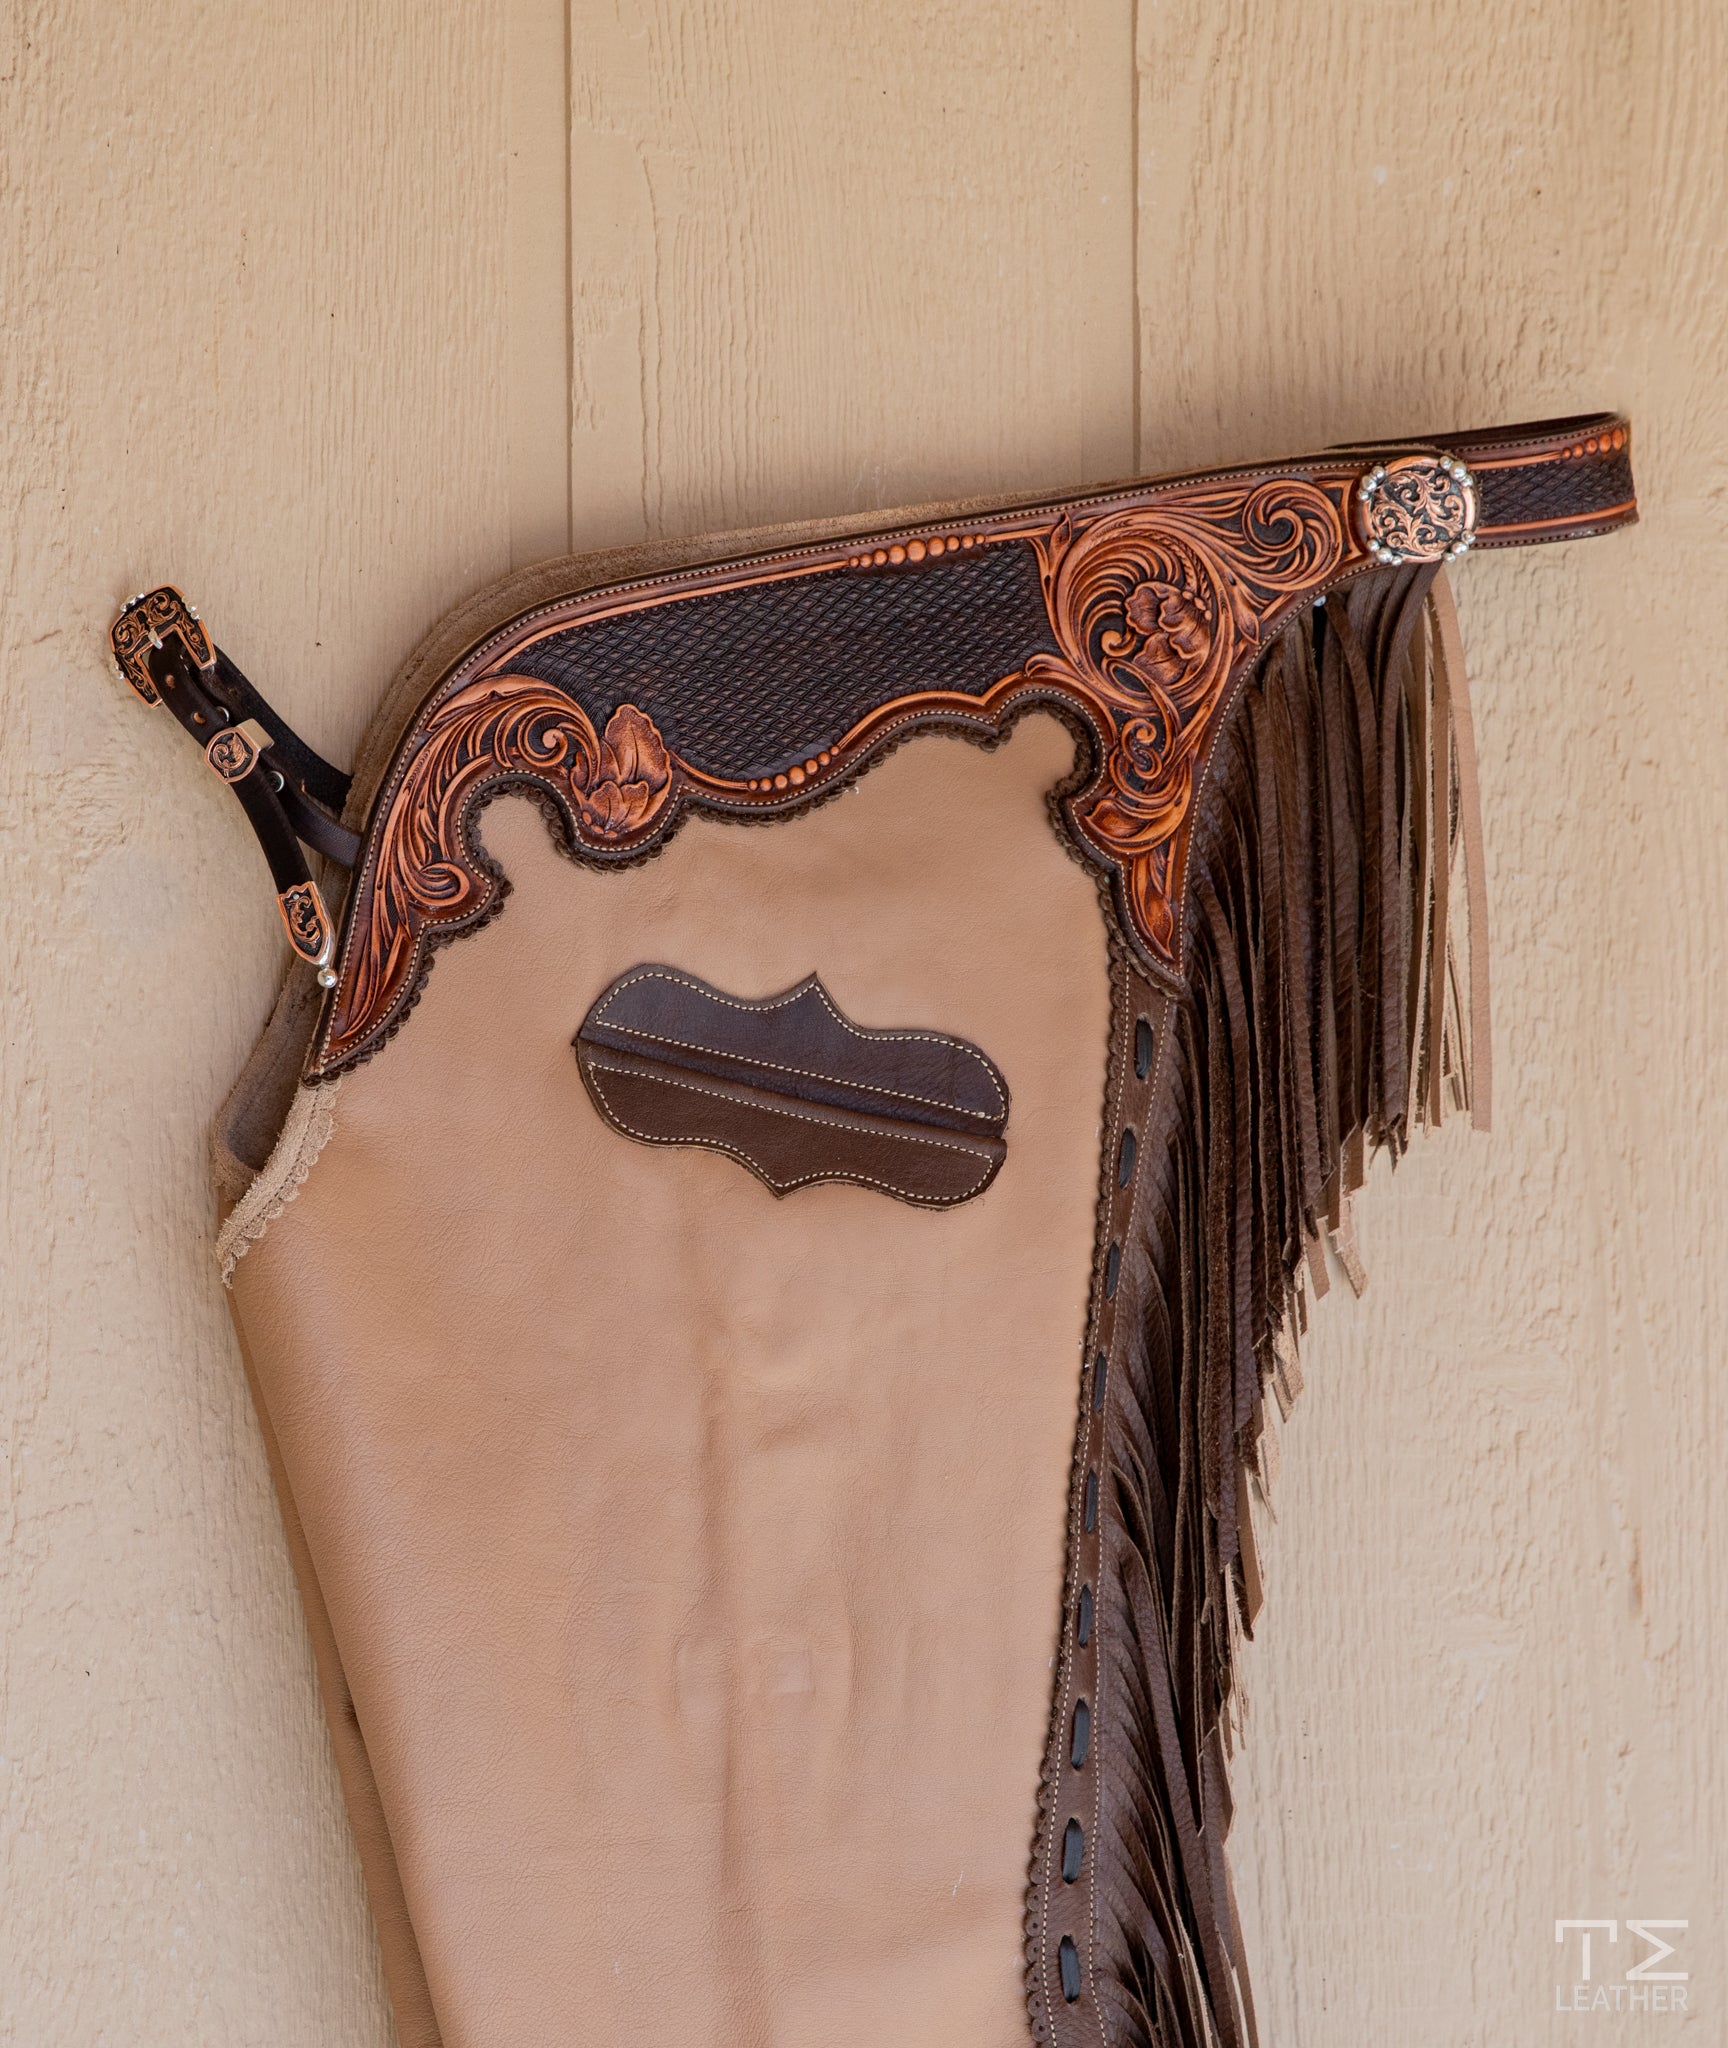 Sand Smoothout Chaps w/ Brown & Light Brown Two Toned Floral Yokes w/ Diamond Stamp Accents